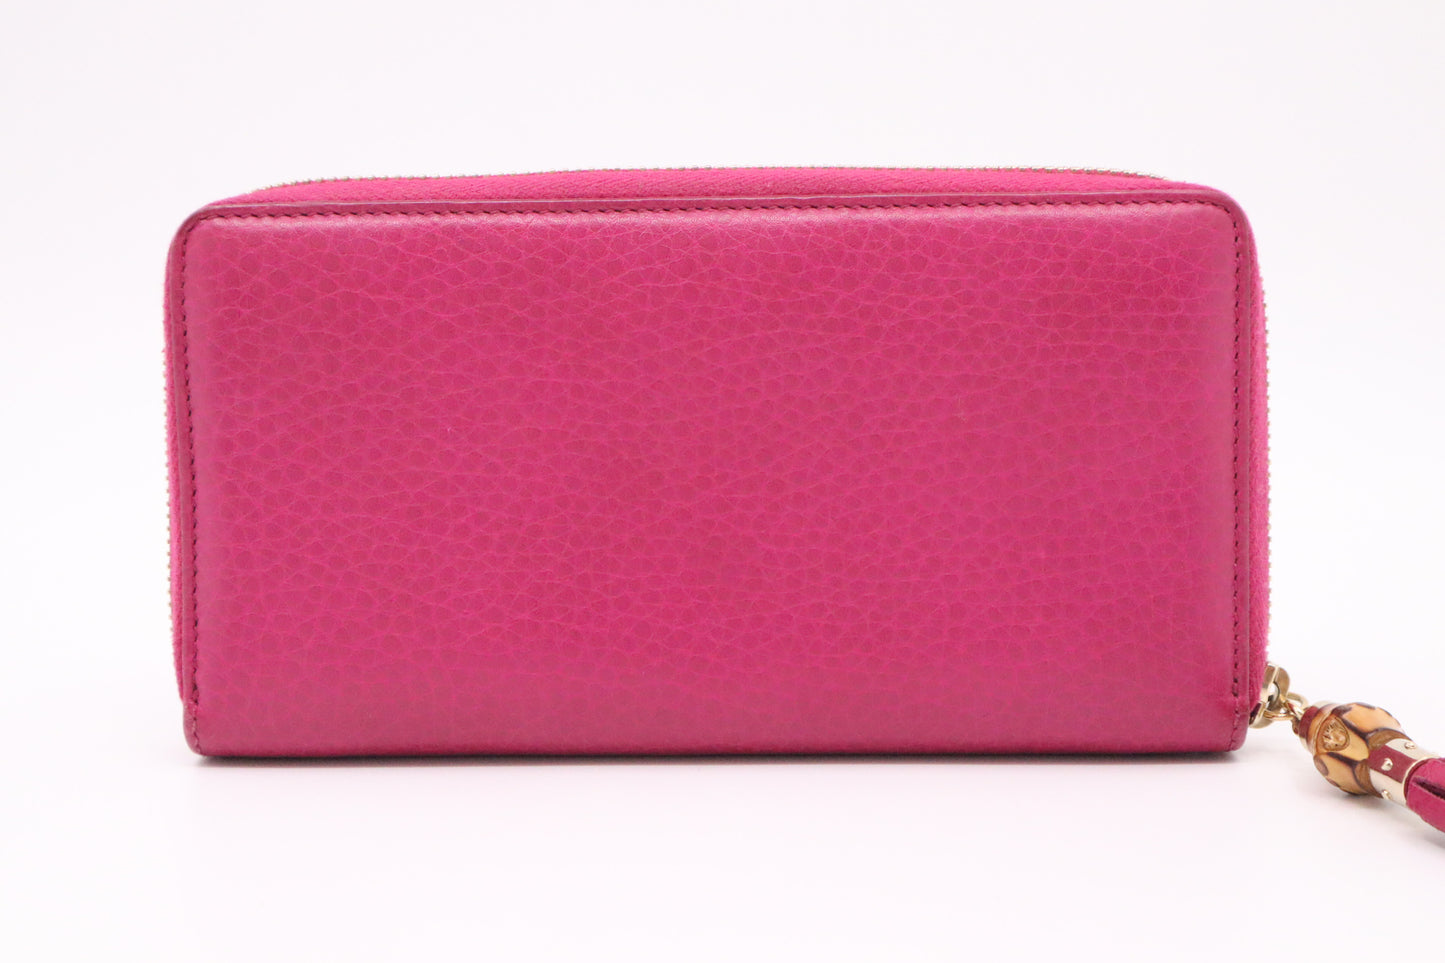 Gucci Bamboo Long Wallet in Pink Leather